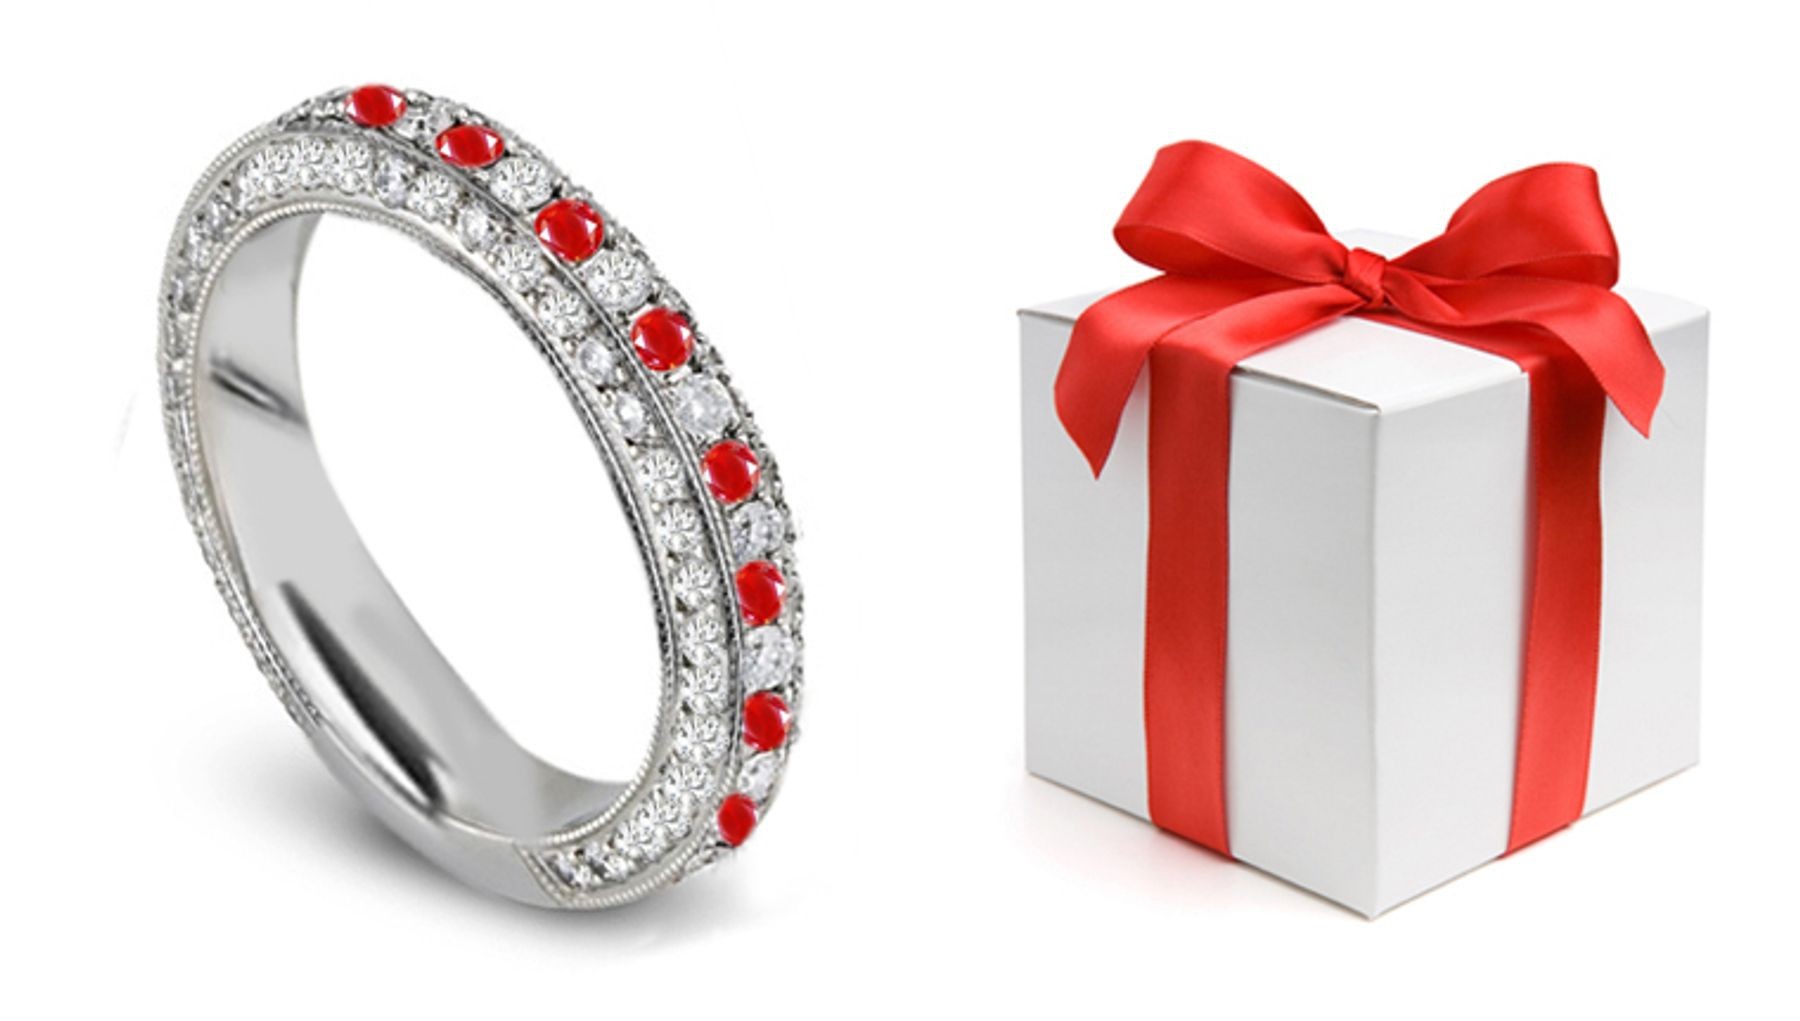 Design & Style: Twinkling Diamond & Ruby Eternity Band in Polished Platinum or Gold Size 3 to 8